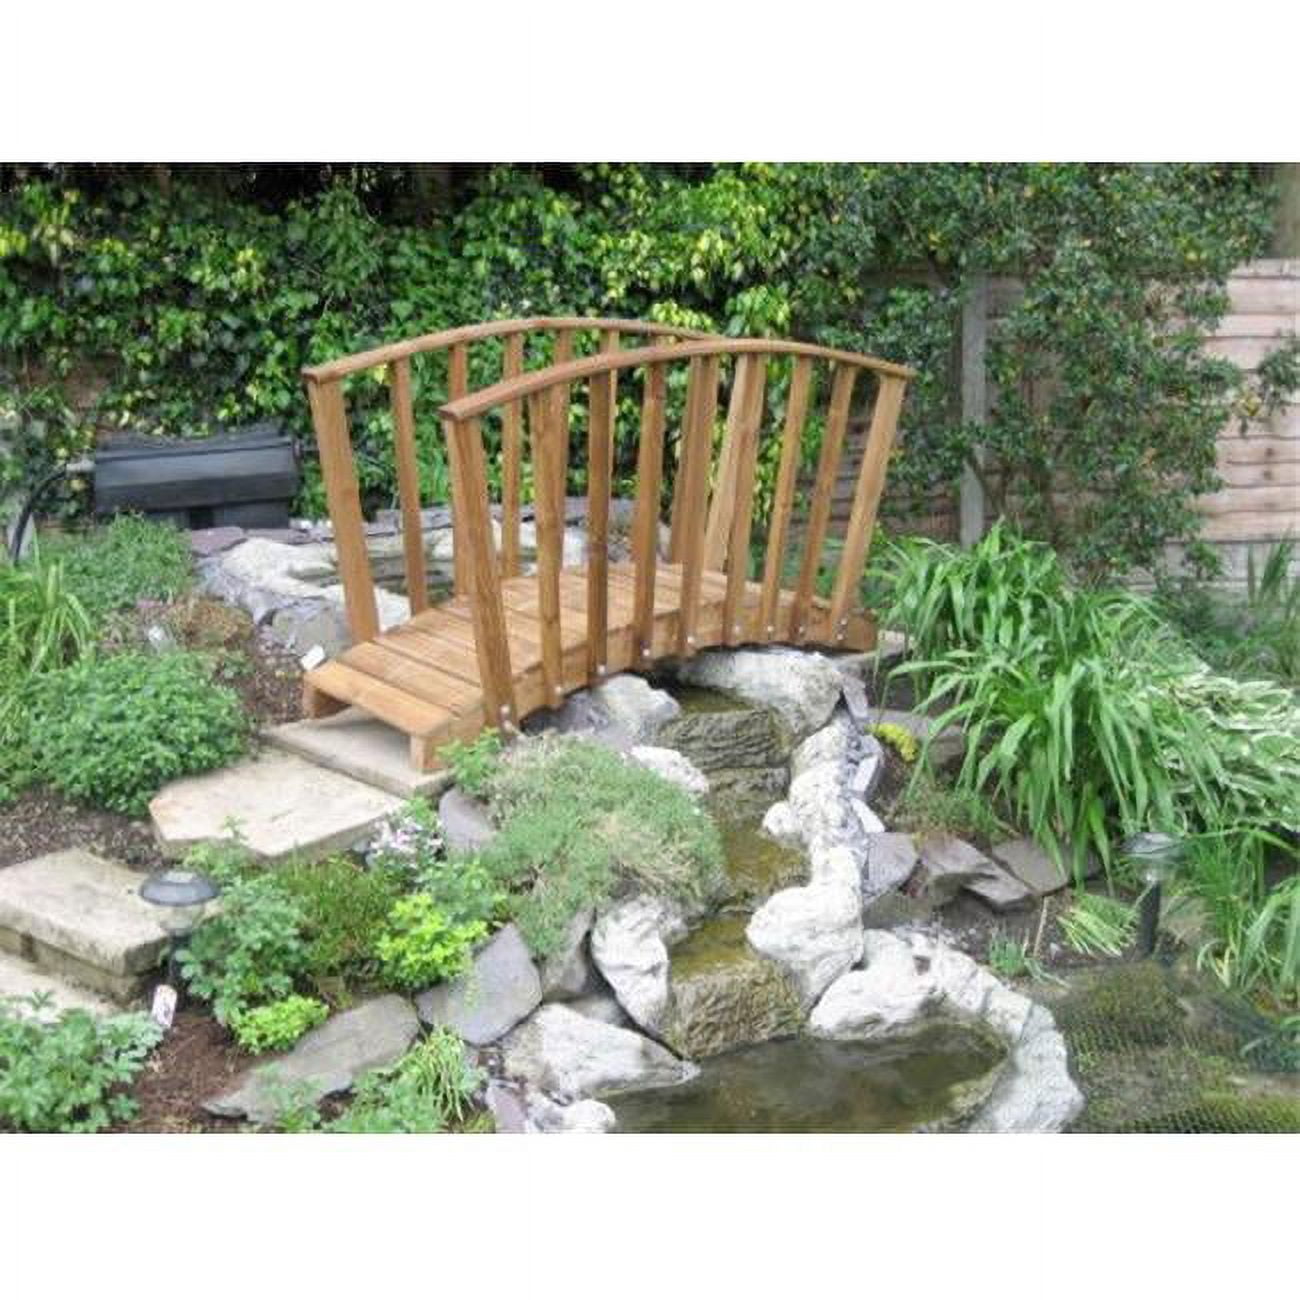 6 Ft. Monets Red Cedar Bridge With Curved Wisteria Canopy